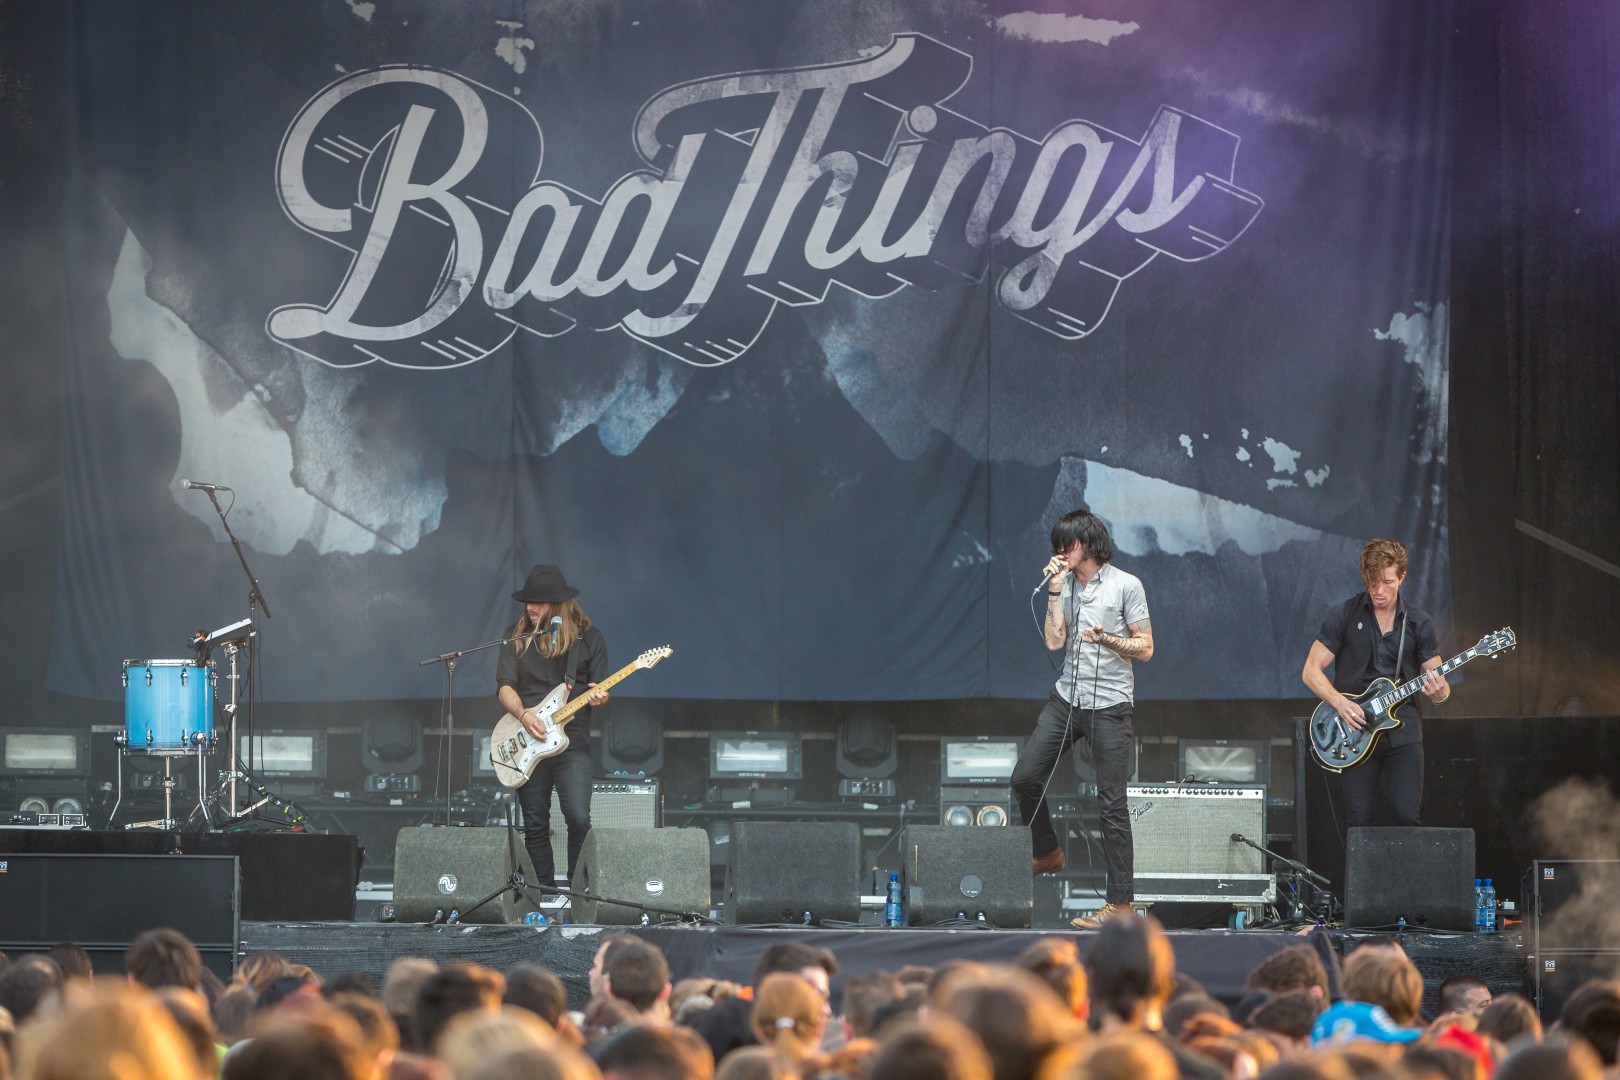 Bad Things at Romexpo in Bucharest on July 5, 2014 (27aaaf79cd)